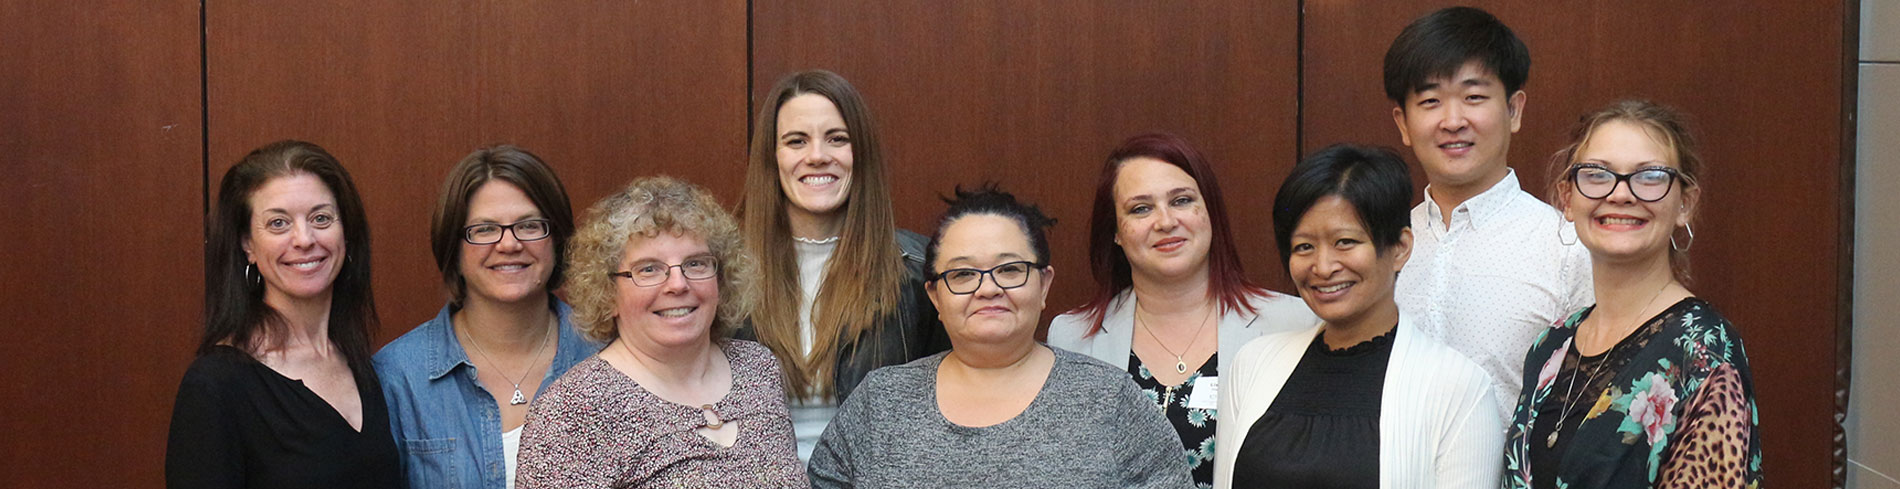 A group of Chicago Hearing Society employees, all smiling, and looking forward to meeting you.